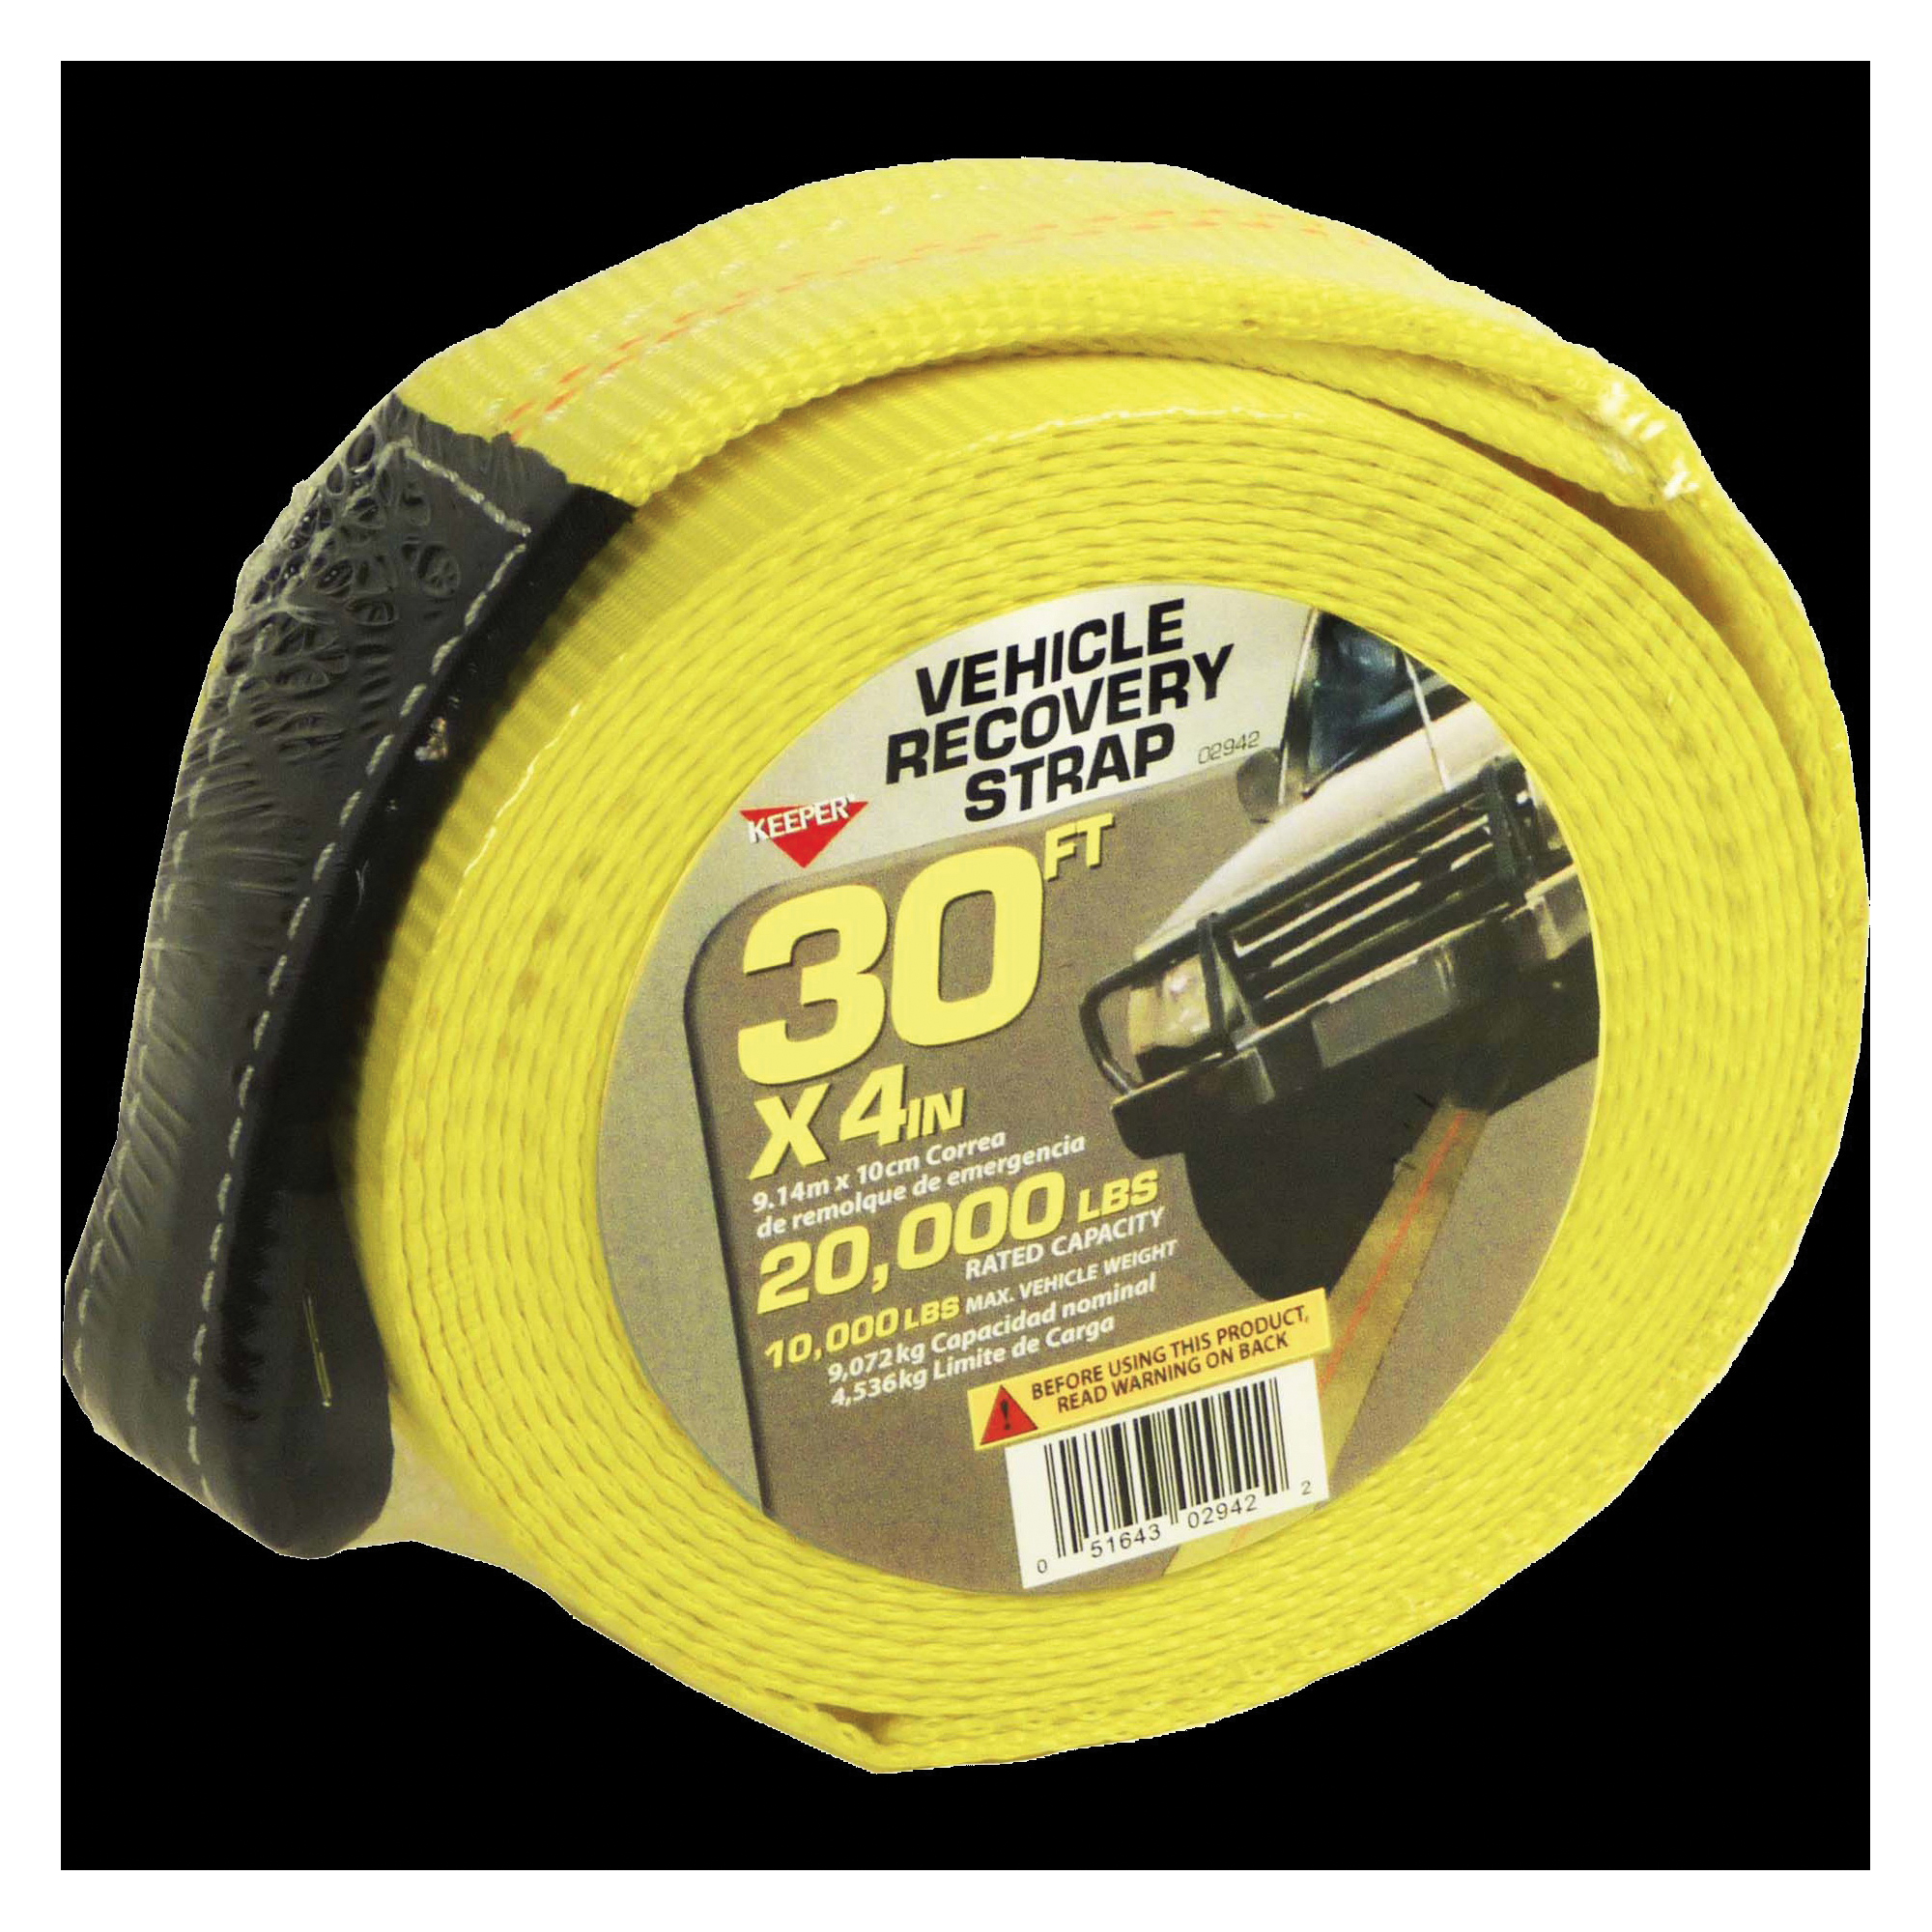 02942 Recovery Strap with Ware Guard, 20,000 lb, 4 in W, 30 ft L, Hook End, Yellow